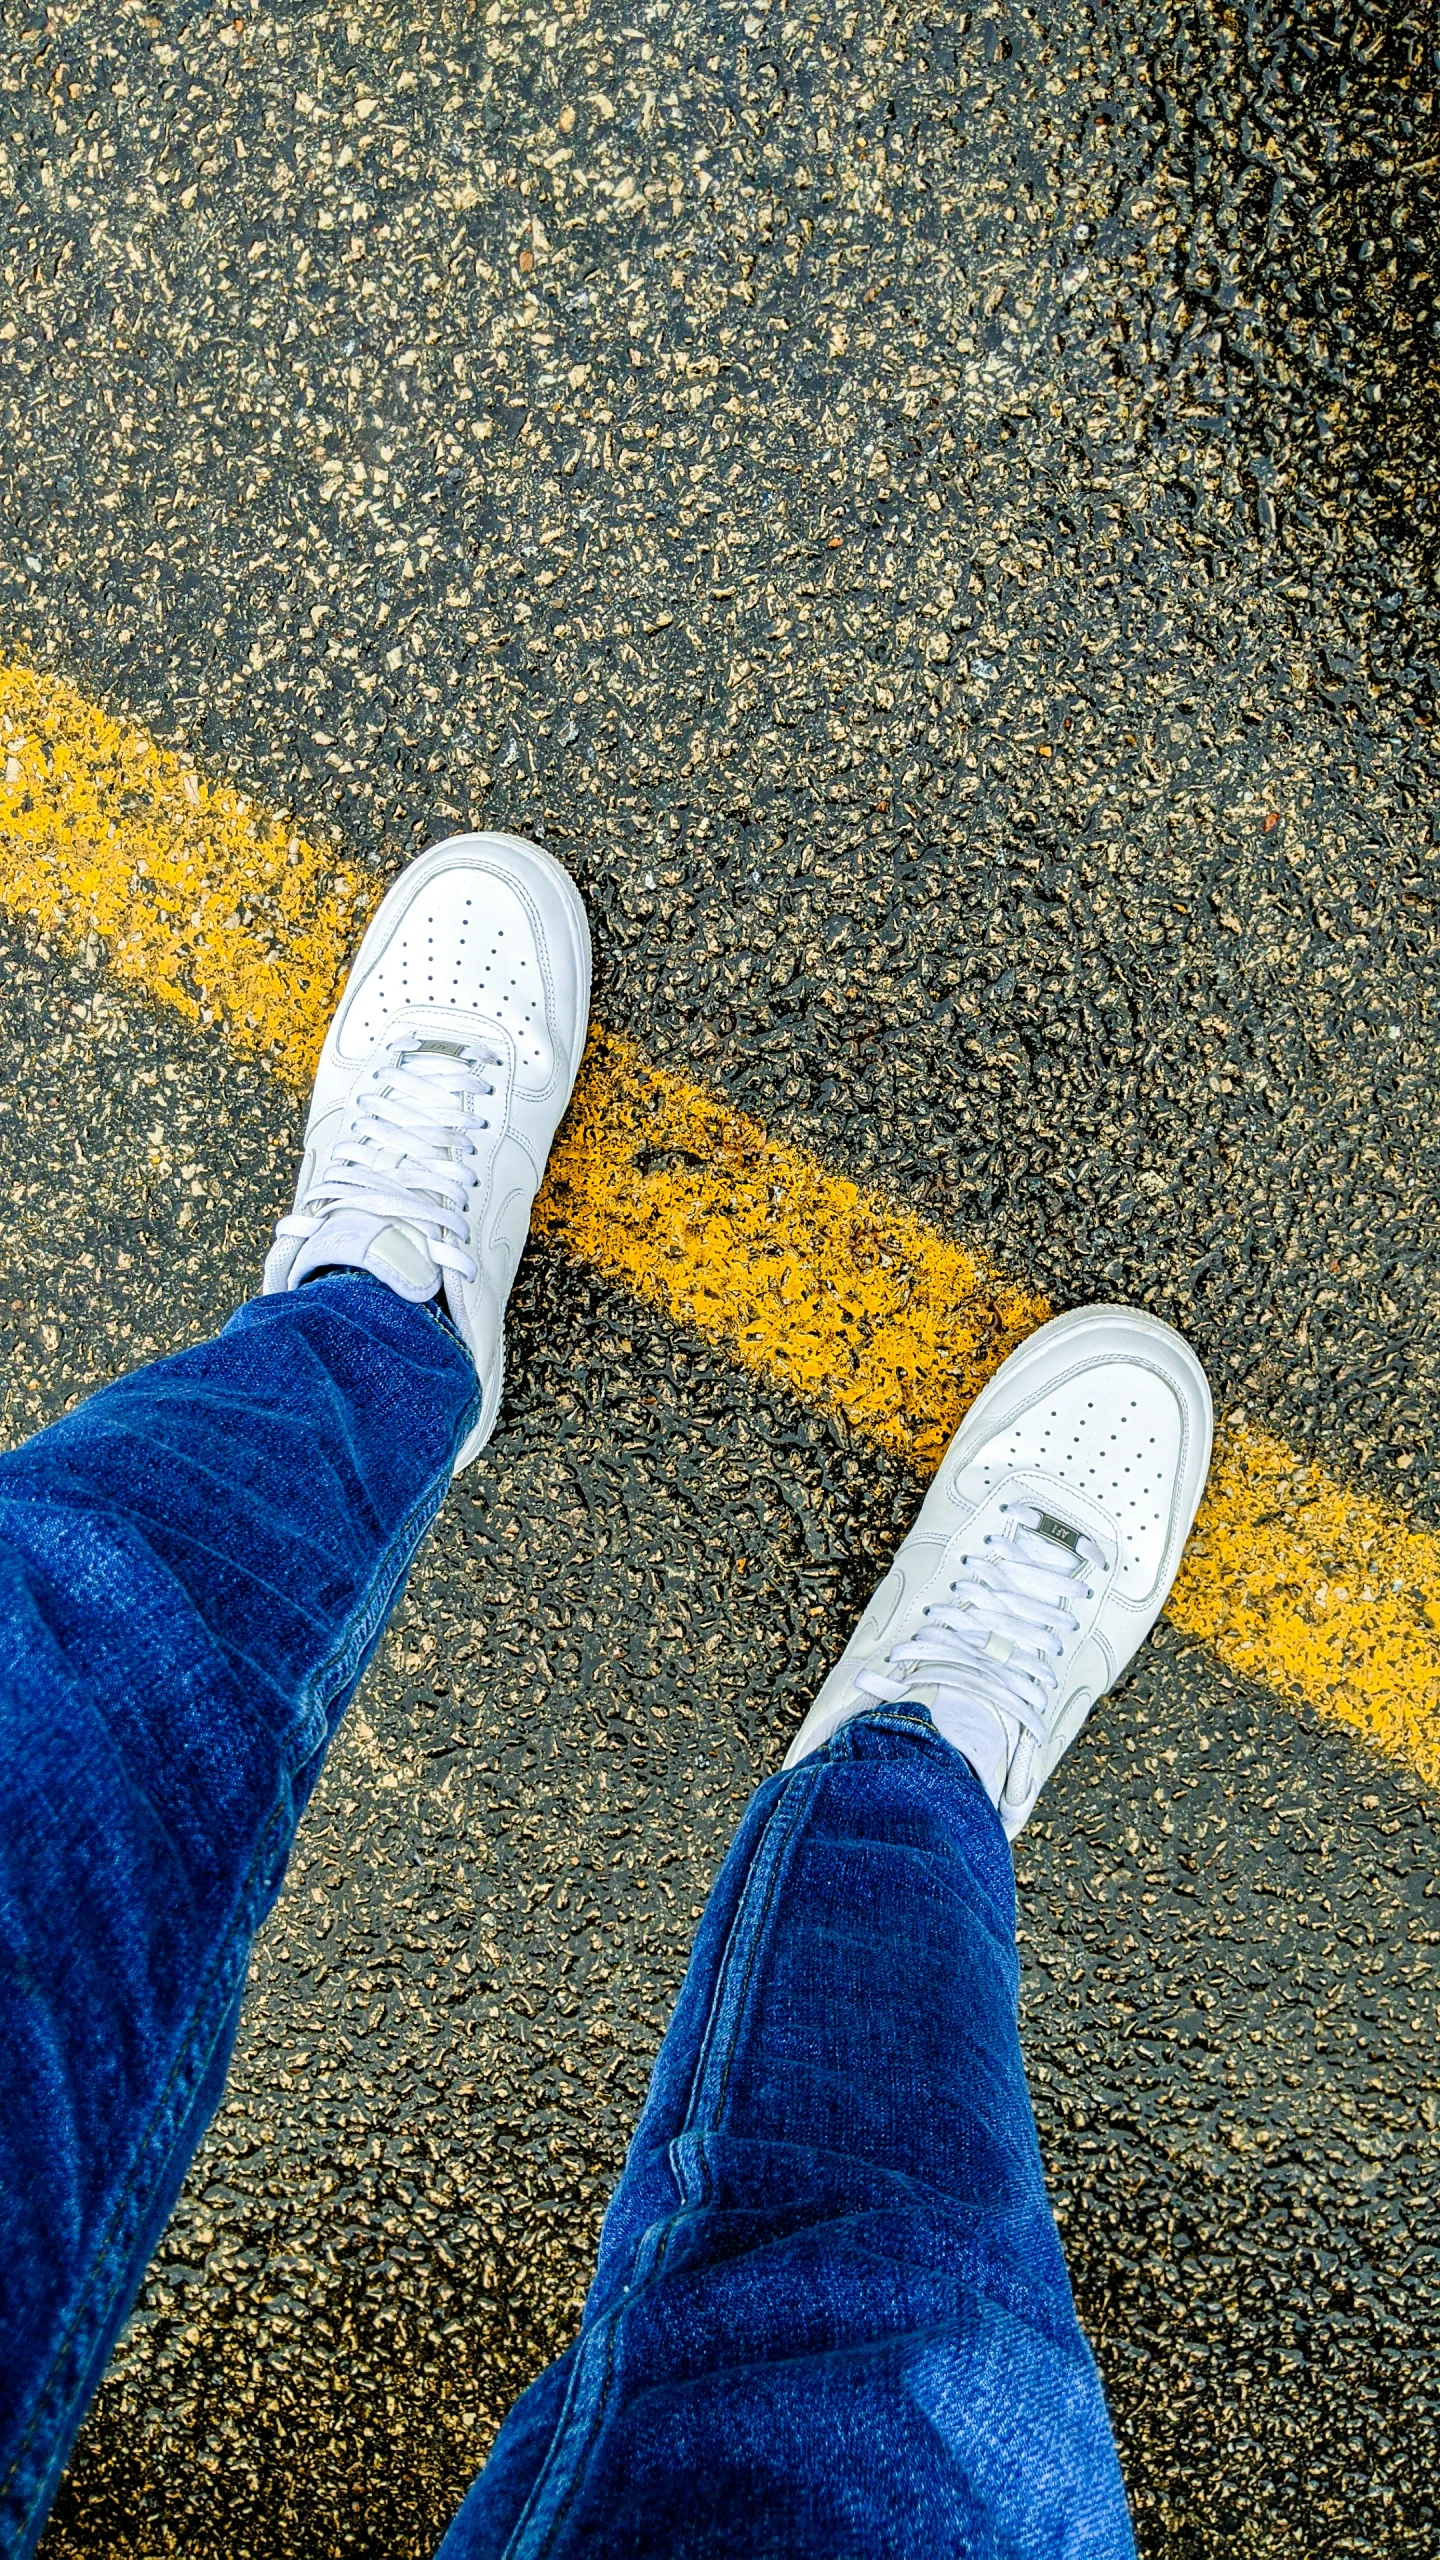 the feet of a person wearing a white sneakers